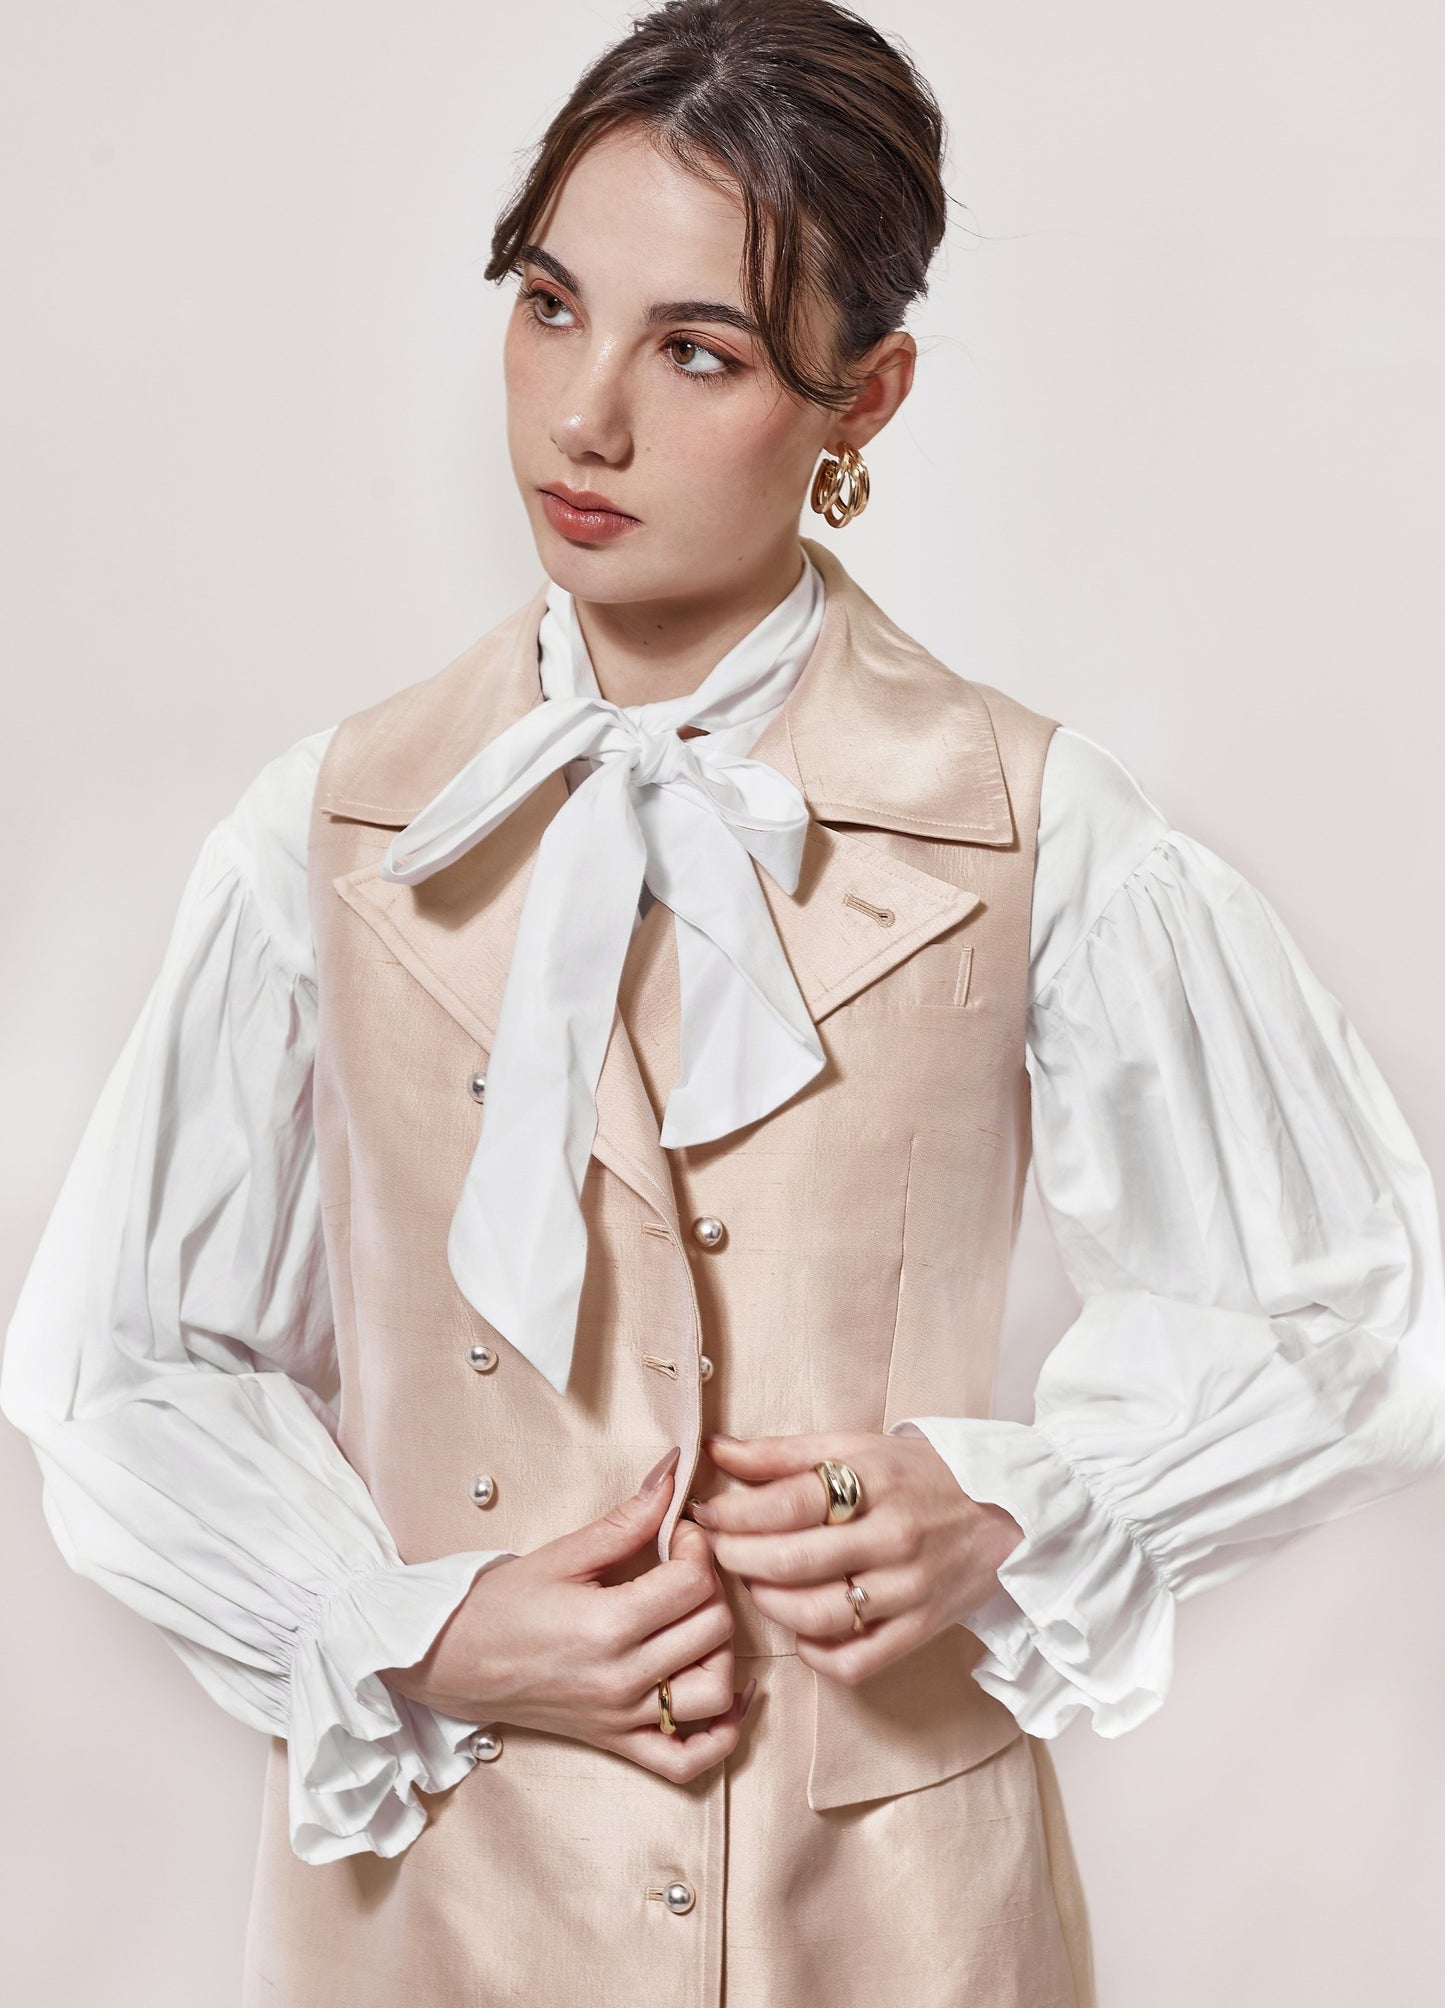 Cotton silk shantung double-breasted vest *Made to order